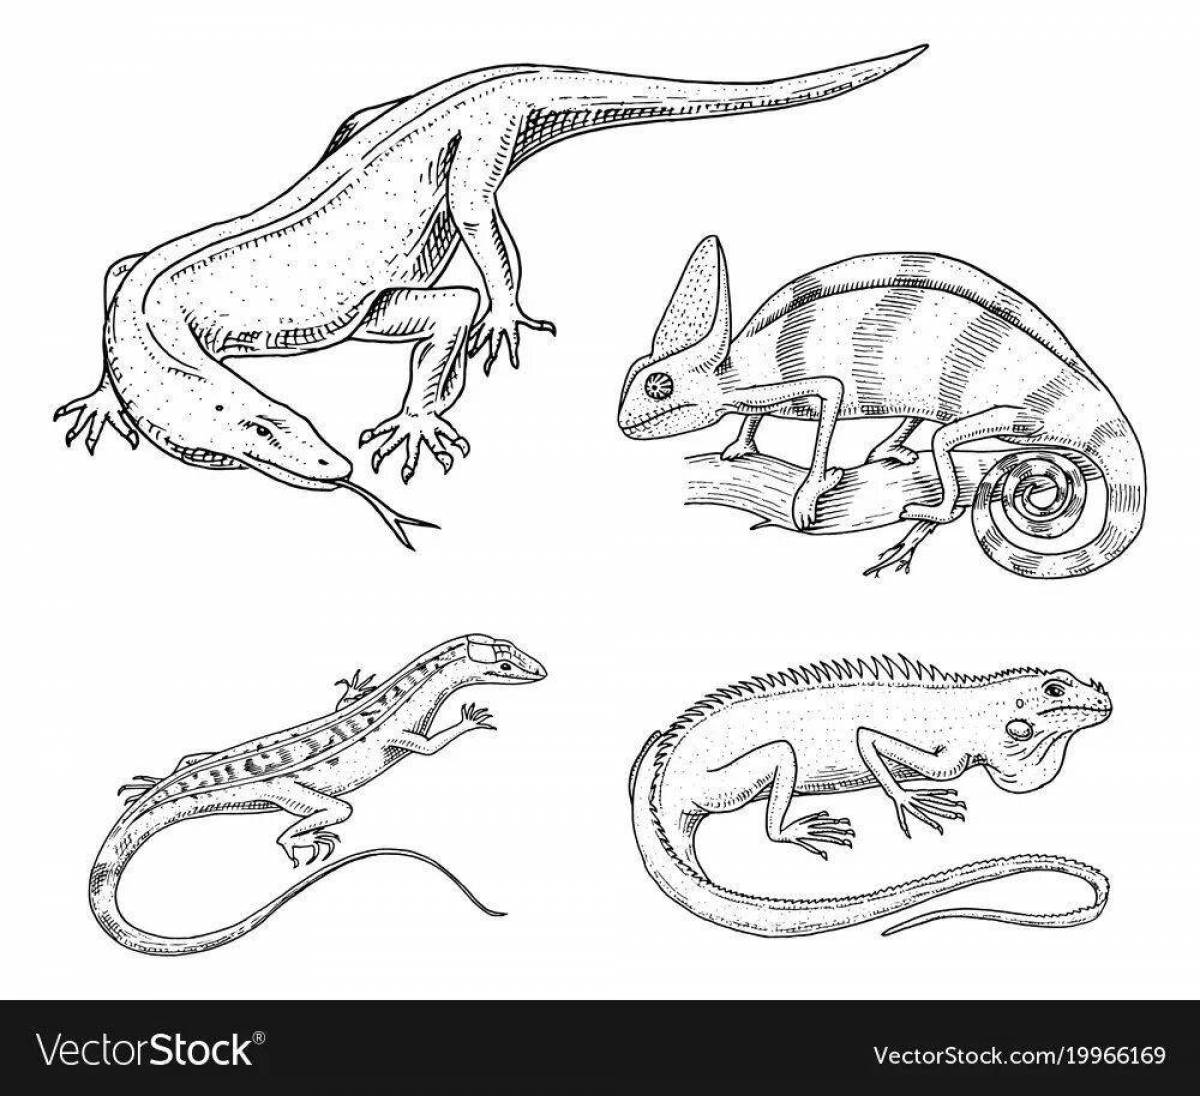 Great reptile coloring pages